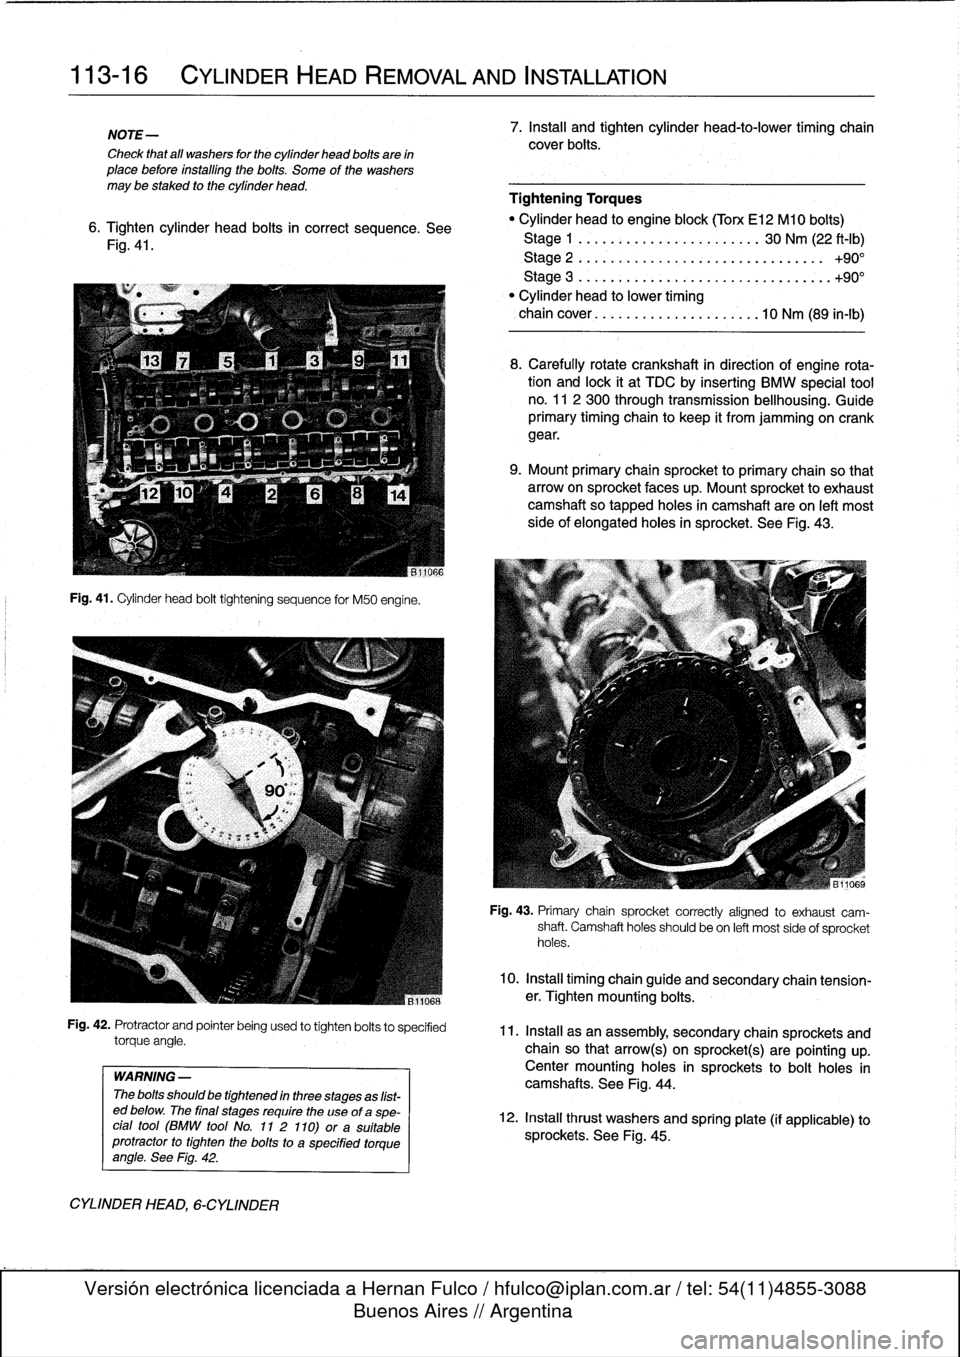 BMW M3 1996 E36 Manual Online 
113-16

	

CYLINDER
HEAD
REMOVAL
AND
INSTALLATION

NOTE-

Check
that
all
washers
for
the
cylinder
head
bolts
are
in
place
before
installlng
the
bolts
.
Some
of
the
washers
may
be
staked
to
the
cylind